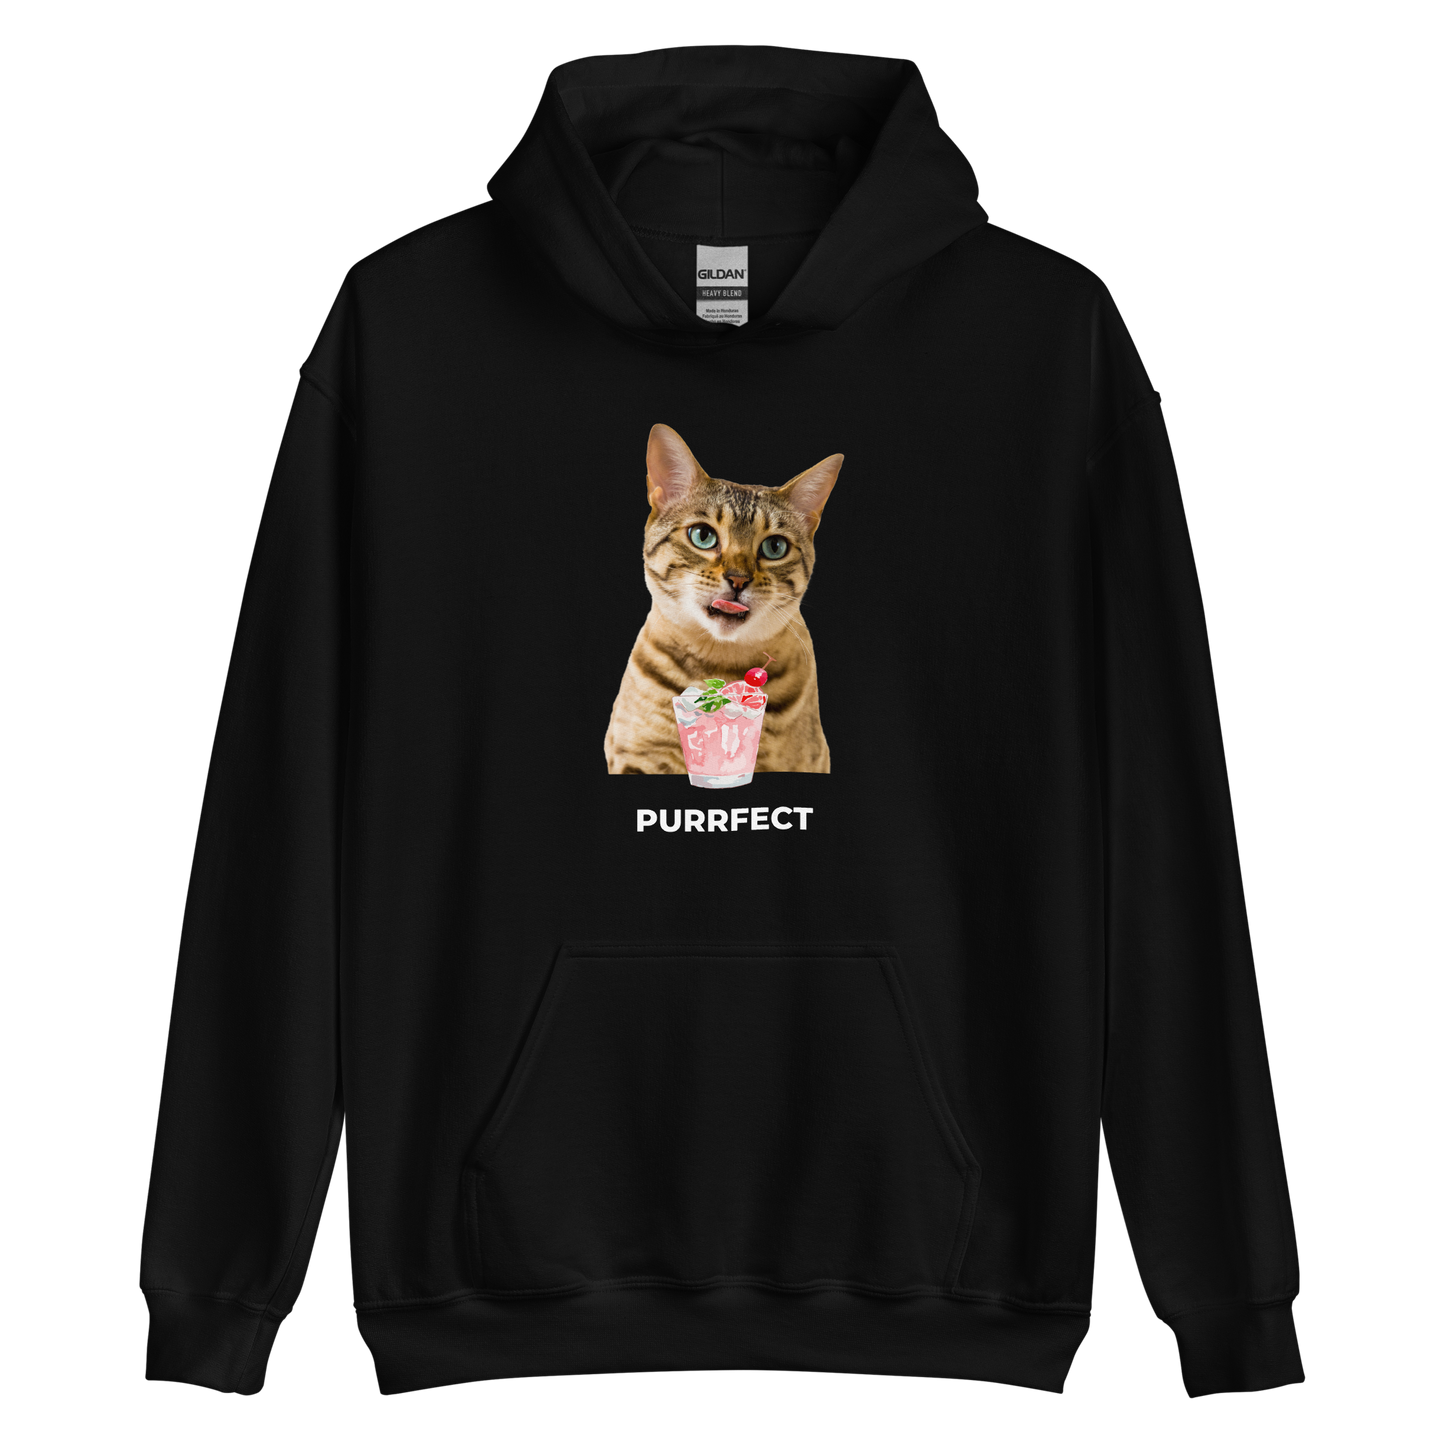 Black Cat Hoodie featuring an adorable Purrfect graphic on the chest - Funny Graphic Cat Hoodies - Boozy Fox